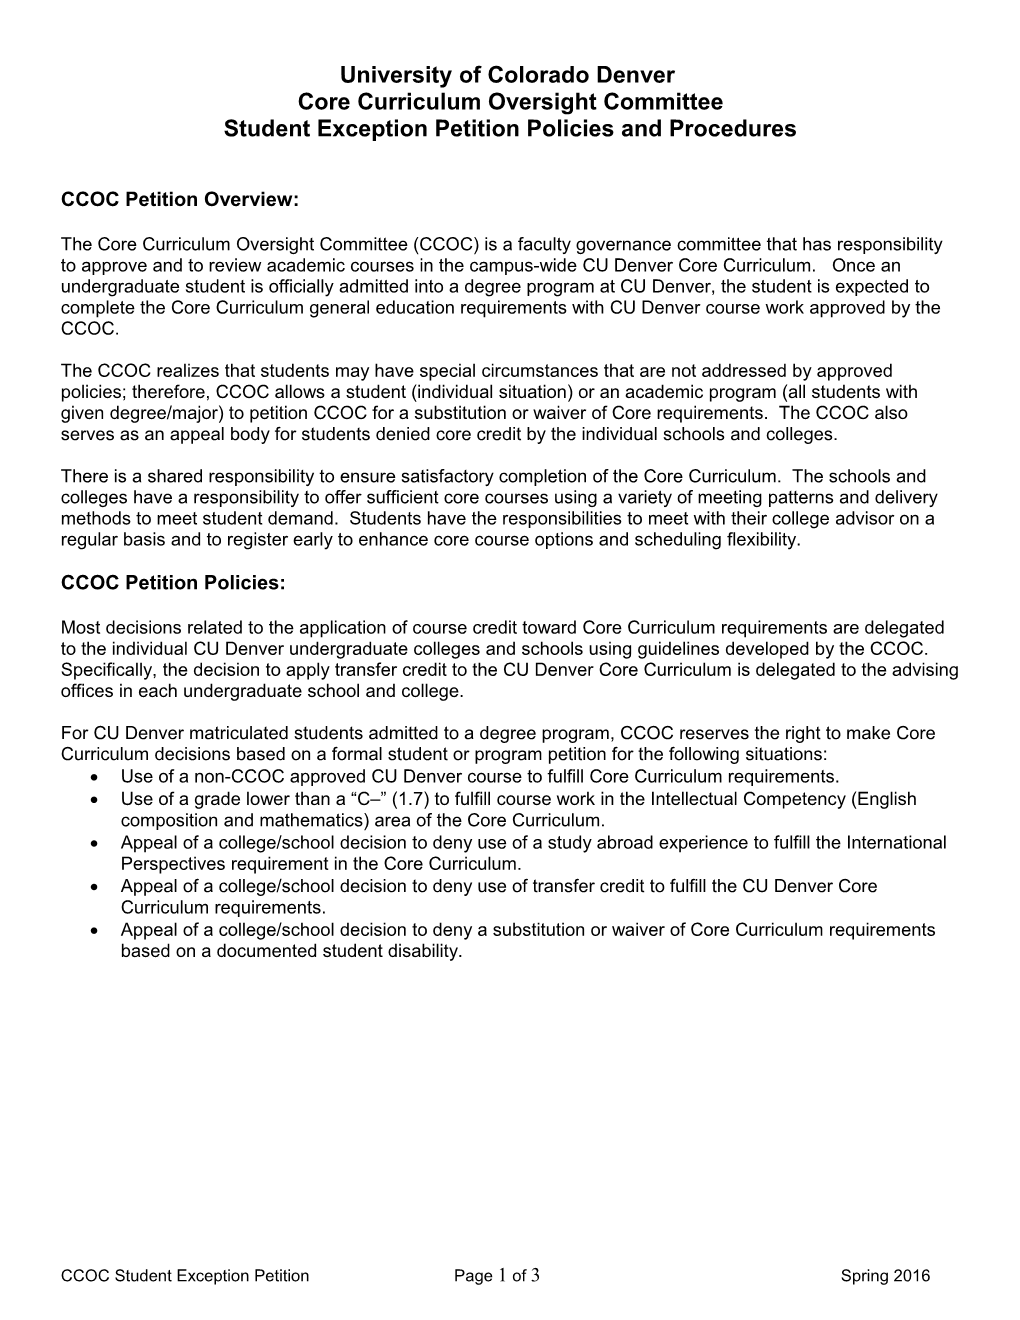 Ucdhsc Core Curriculum Oversight Committee